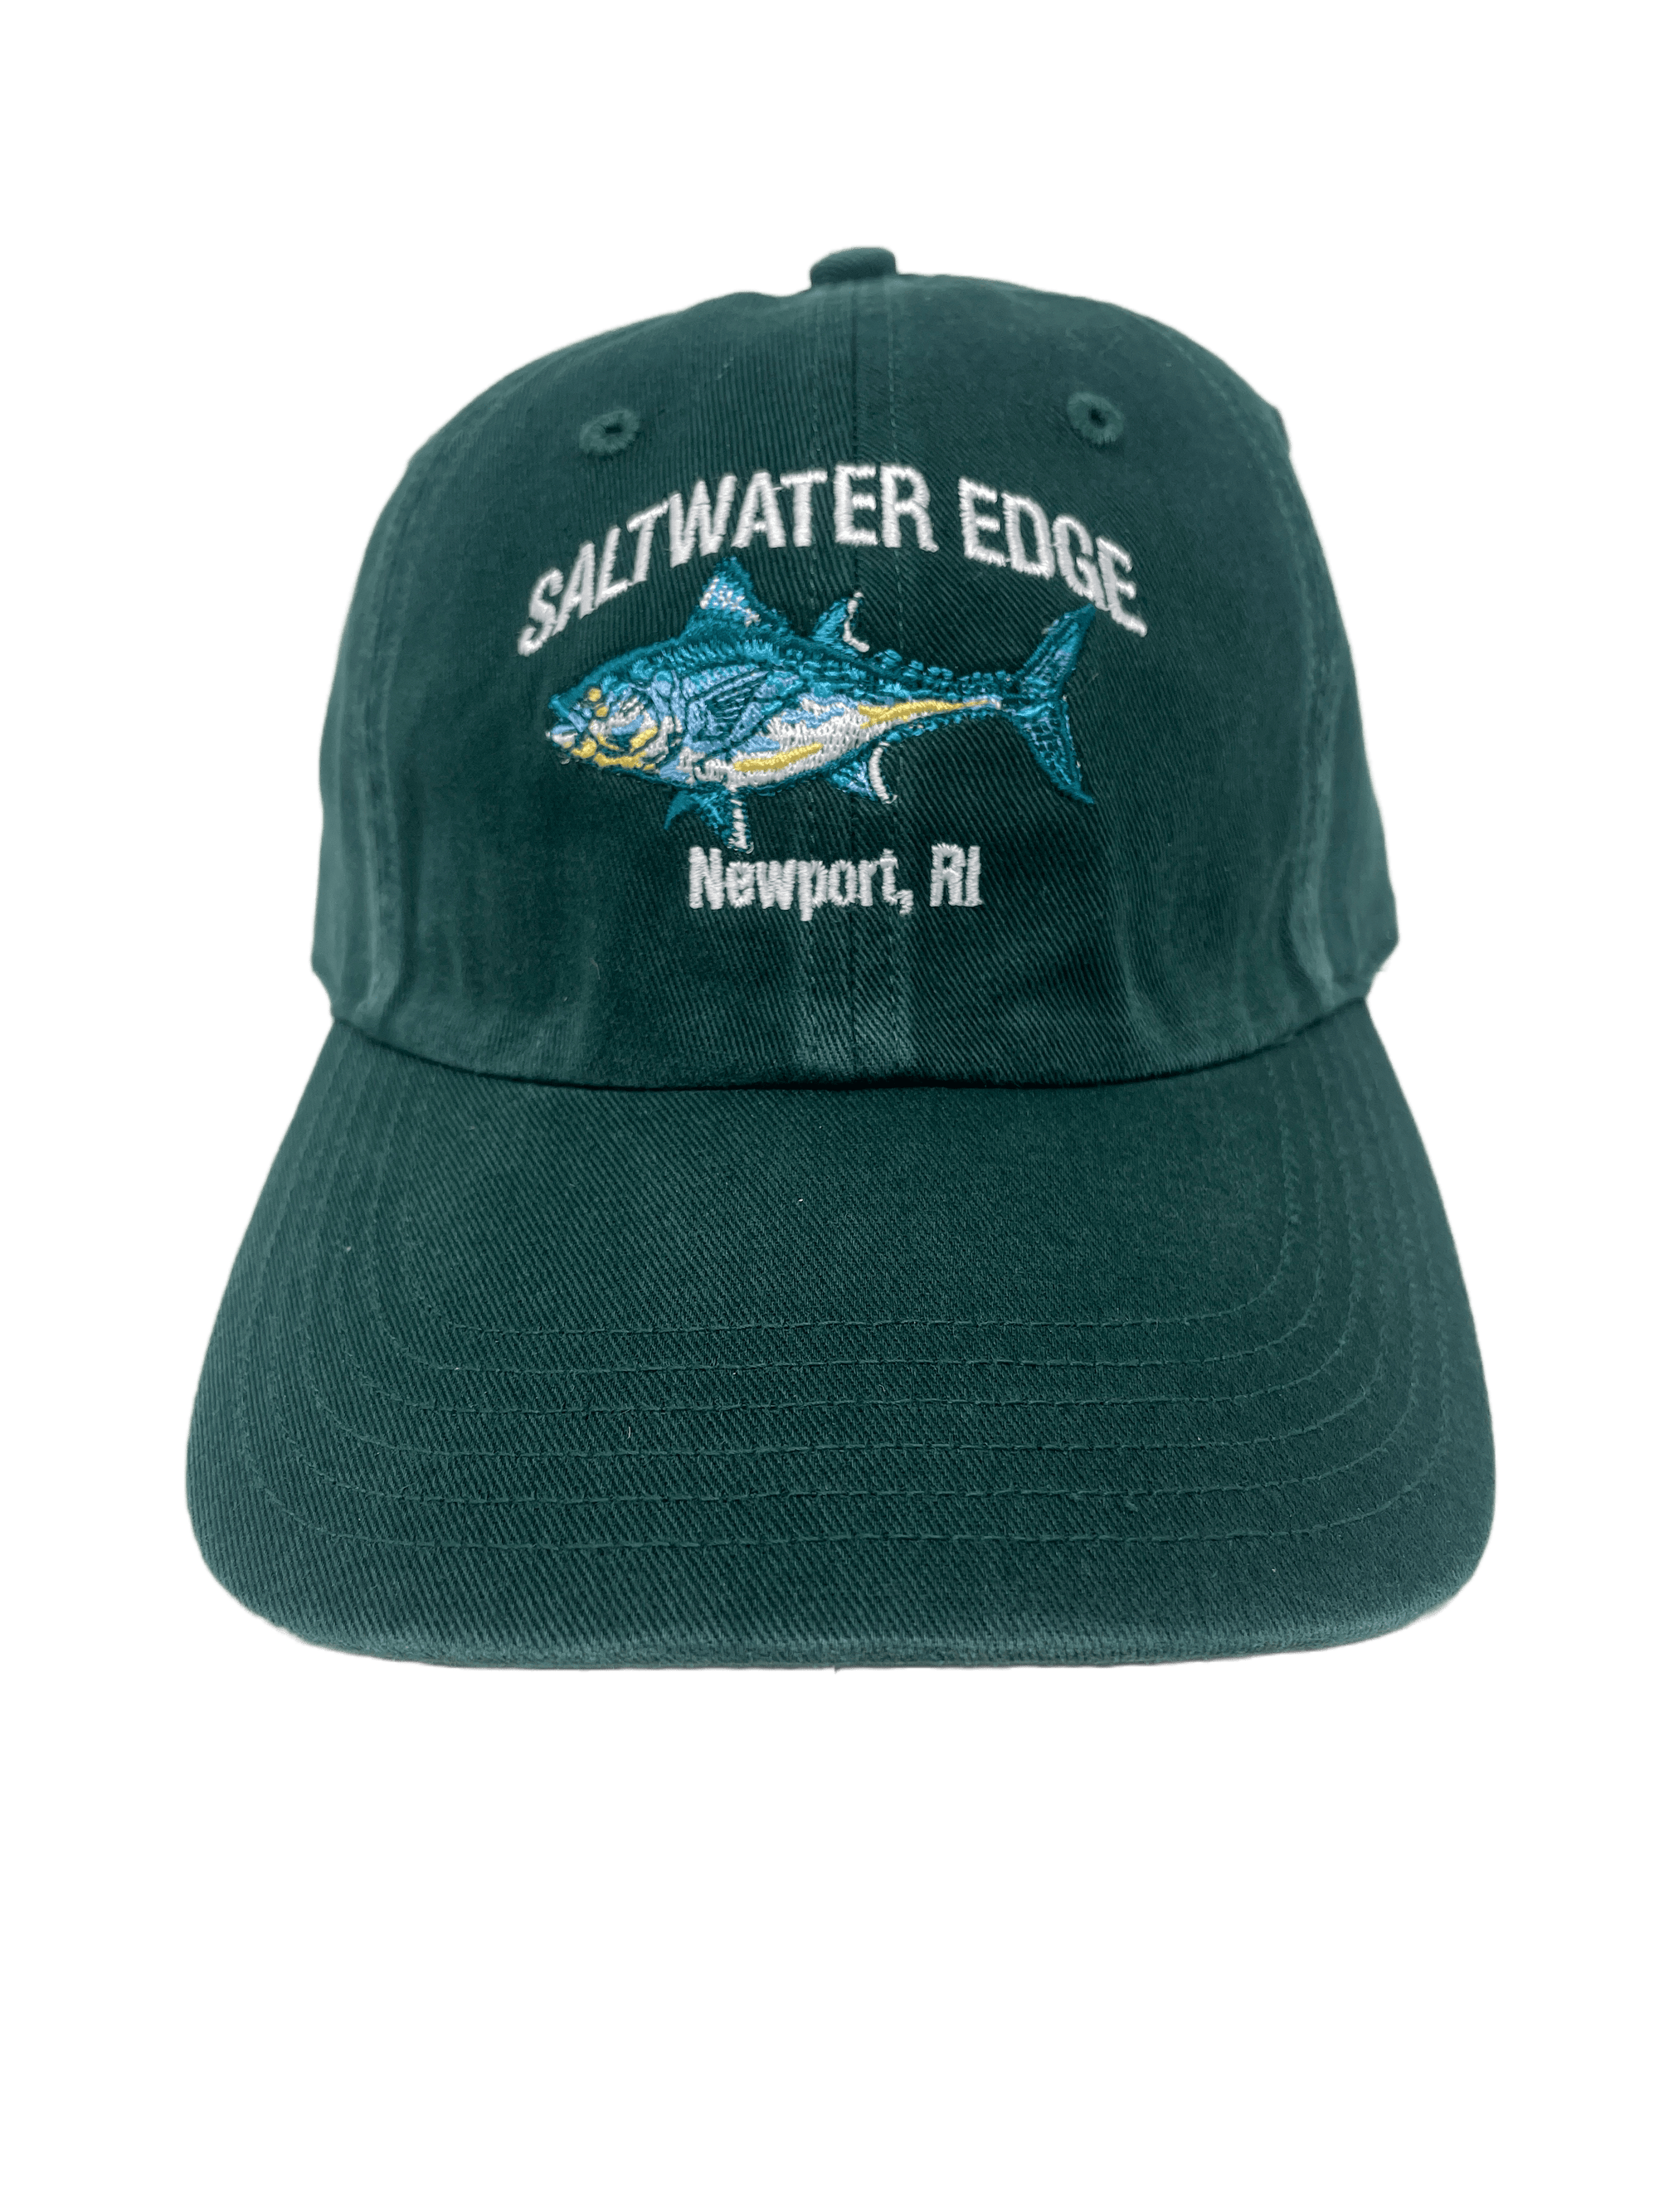 Super Strike Lures Tagged hats - The Saltwater Edge